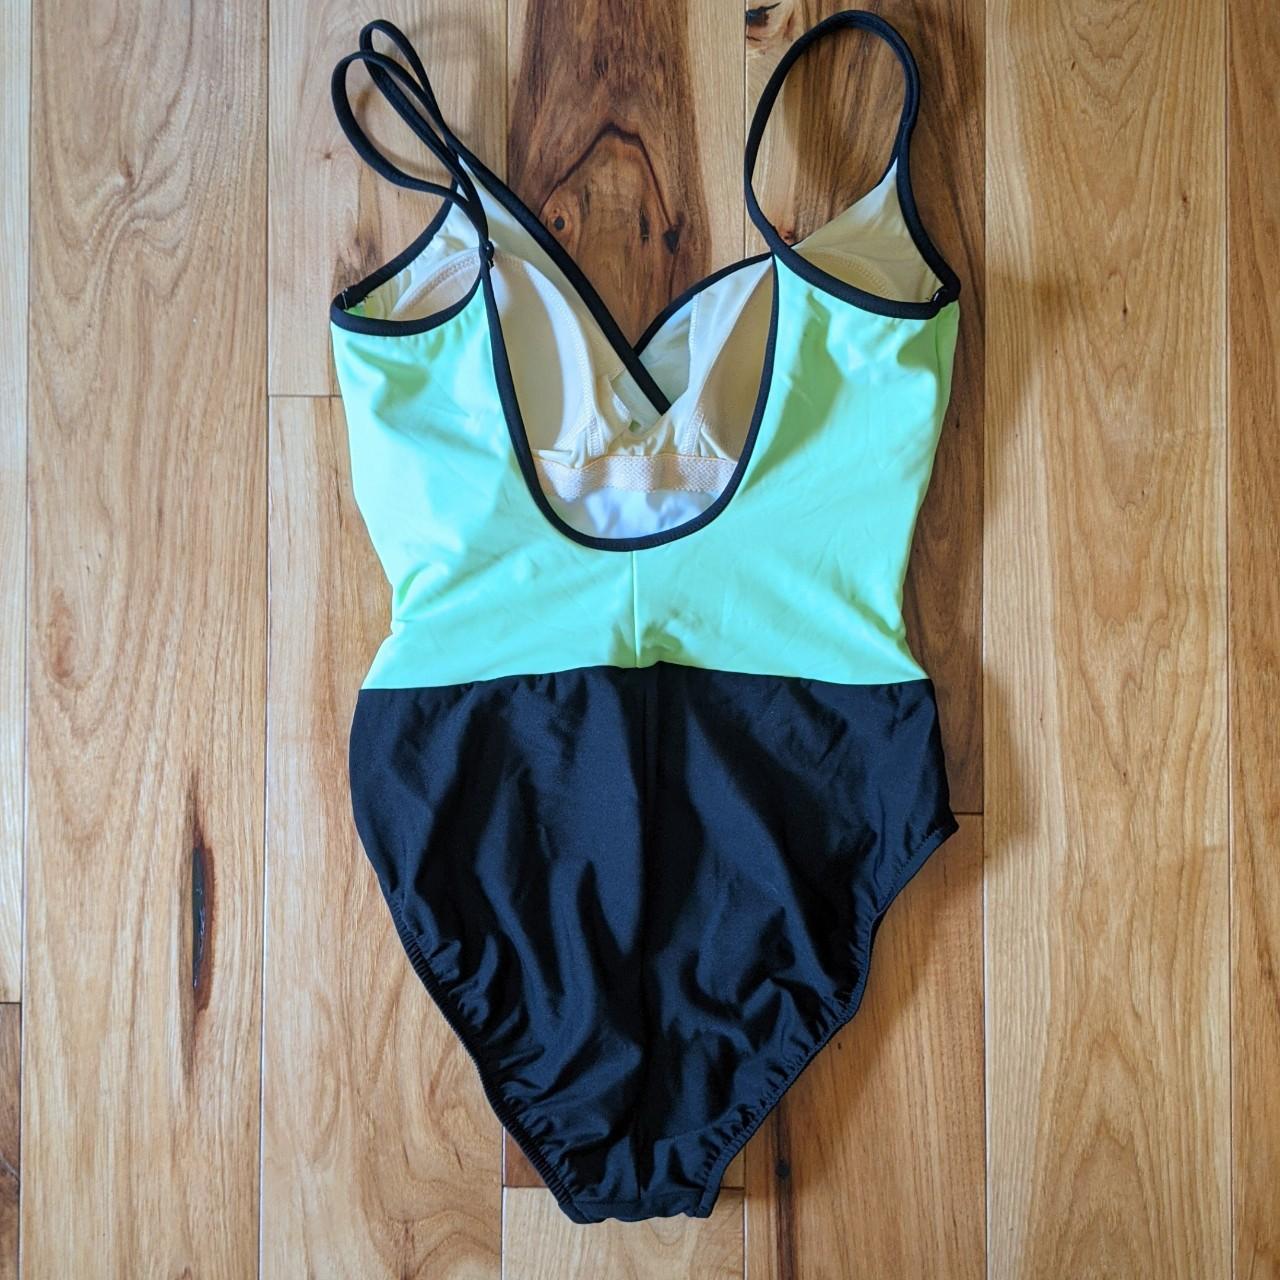 Women's Black and Green Swimsuit-one-piece | Depop